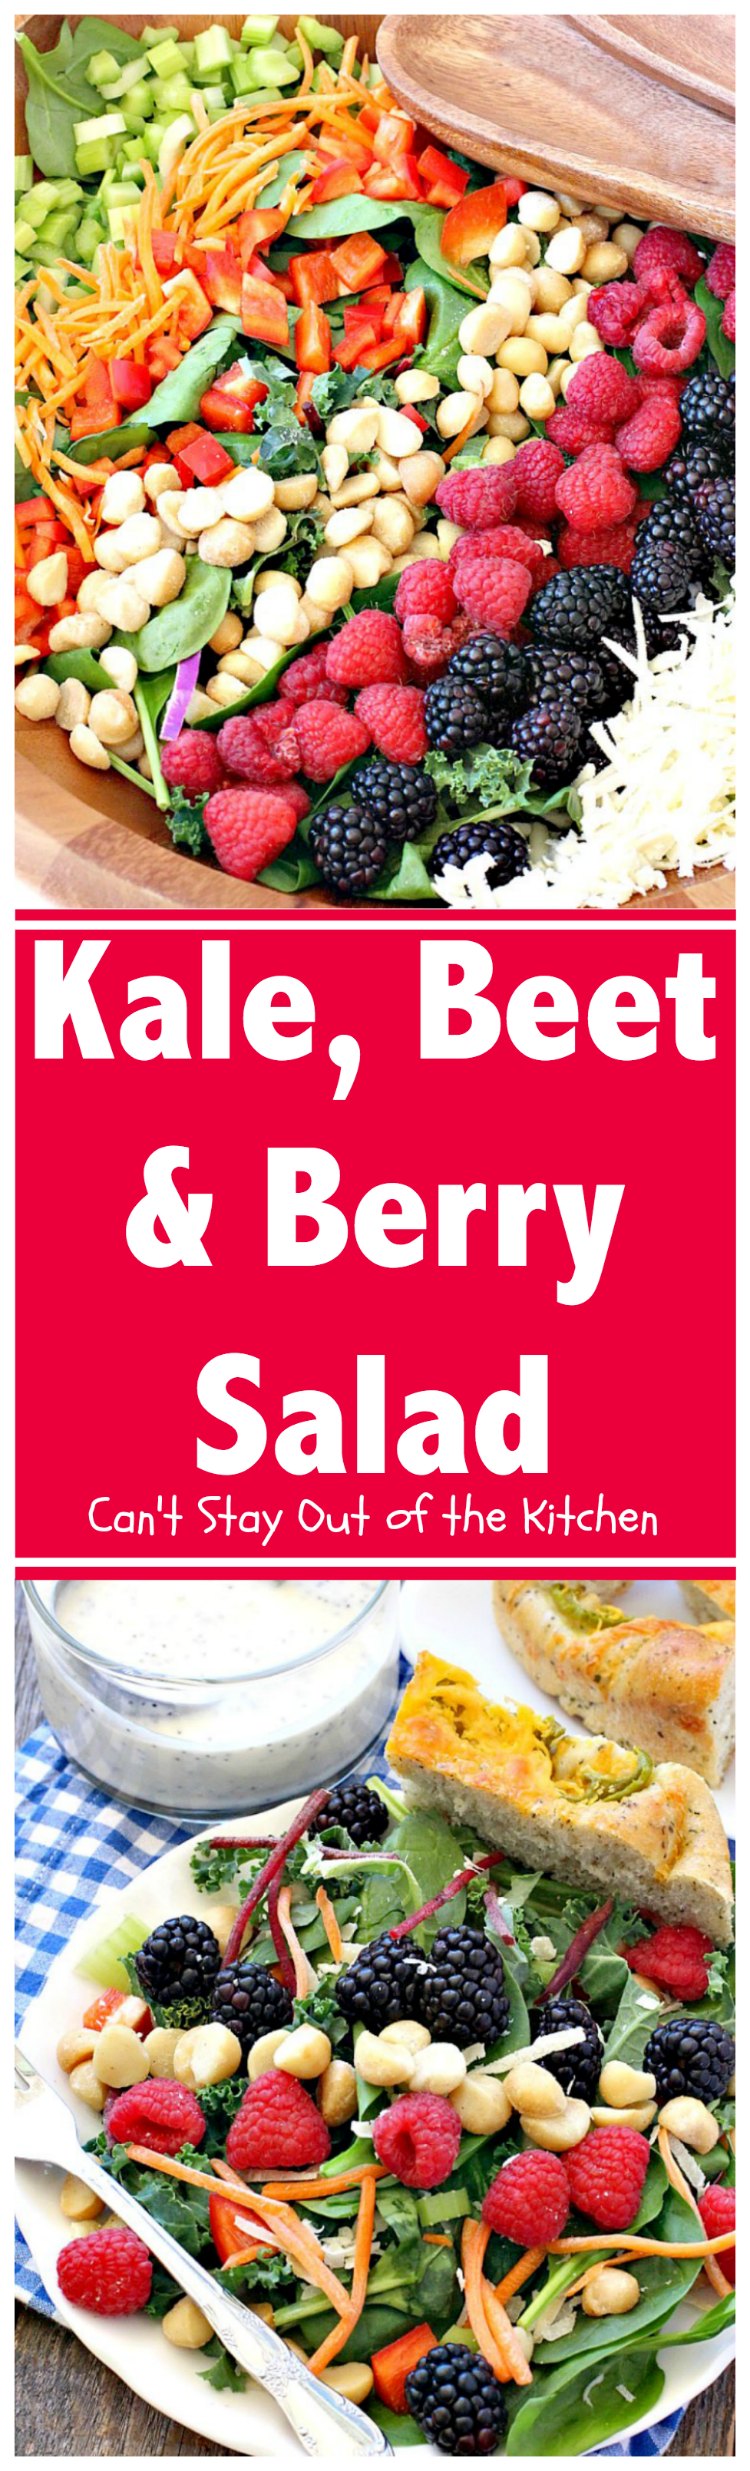 Kale, Beet and Berry Salad | Can't Stay Out of the KitchenKale, Beet and Berry Salad | Can't Stay Out of the Kitchen